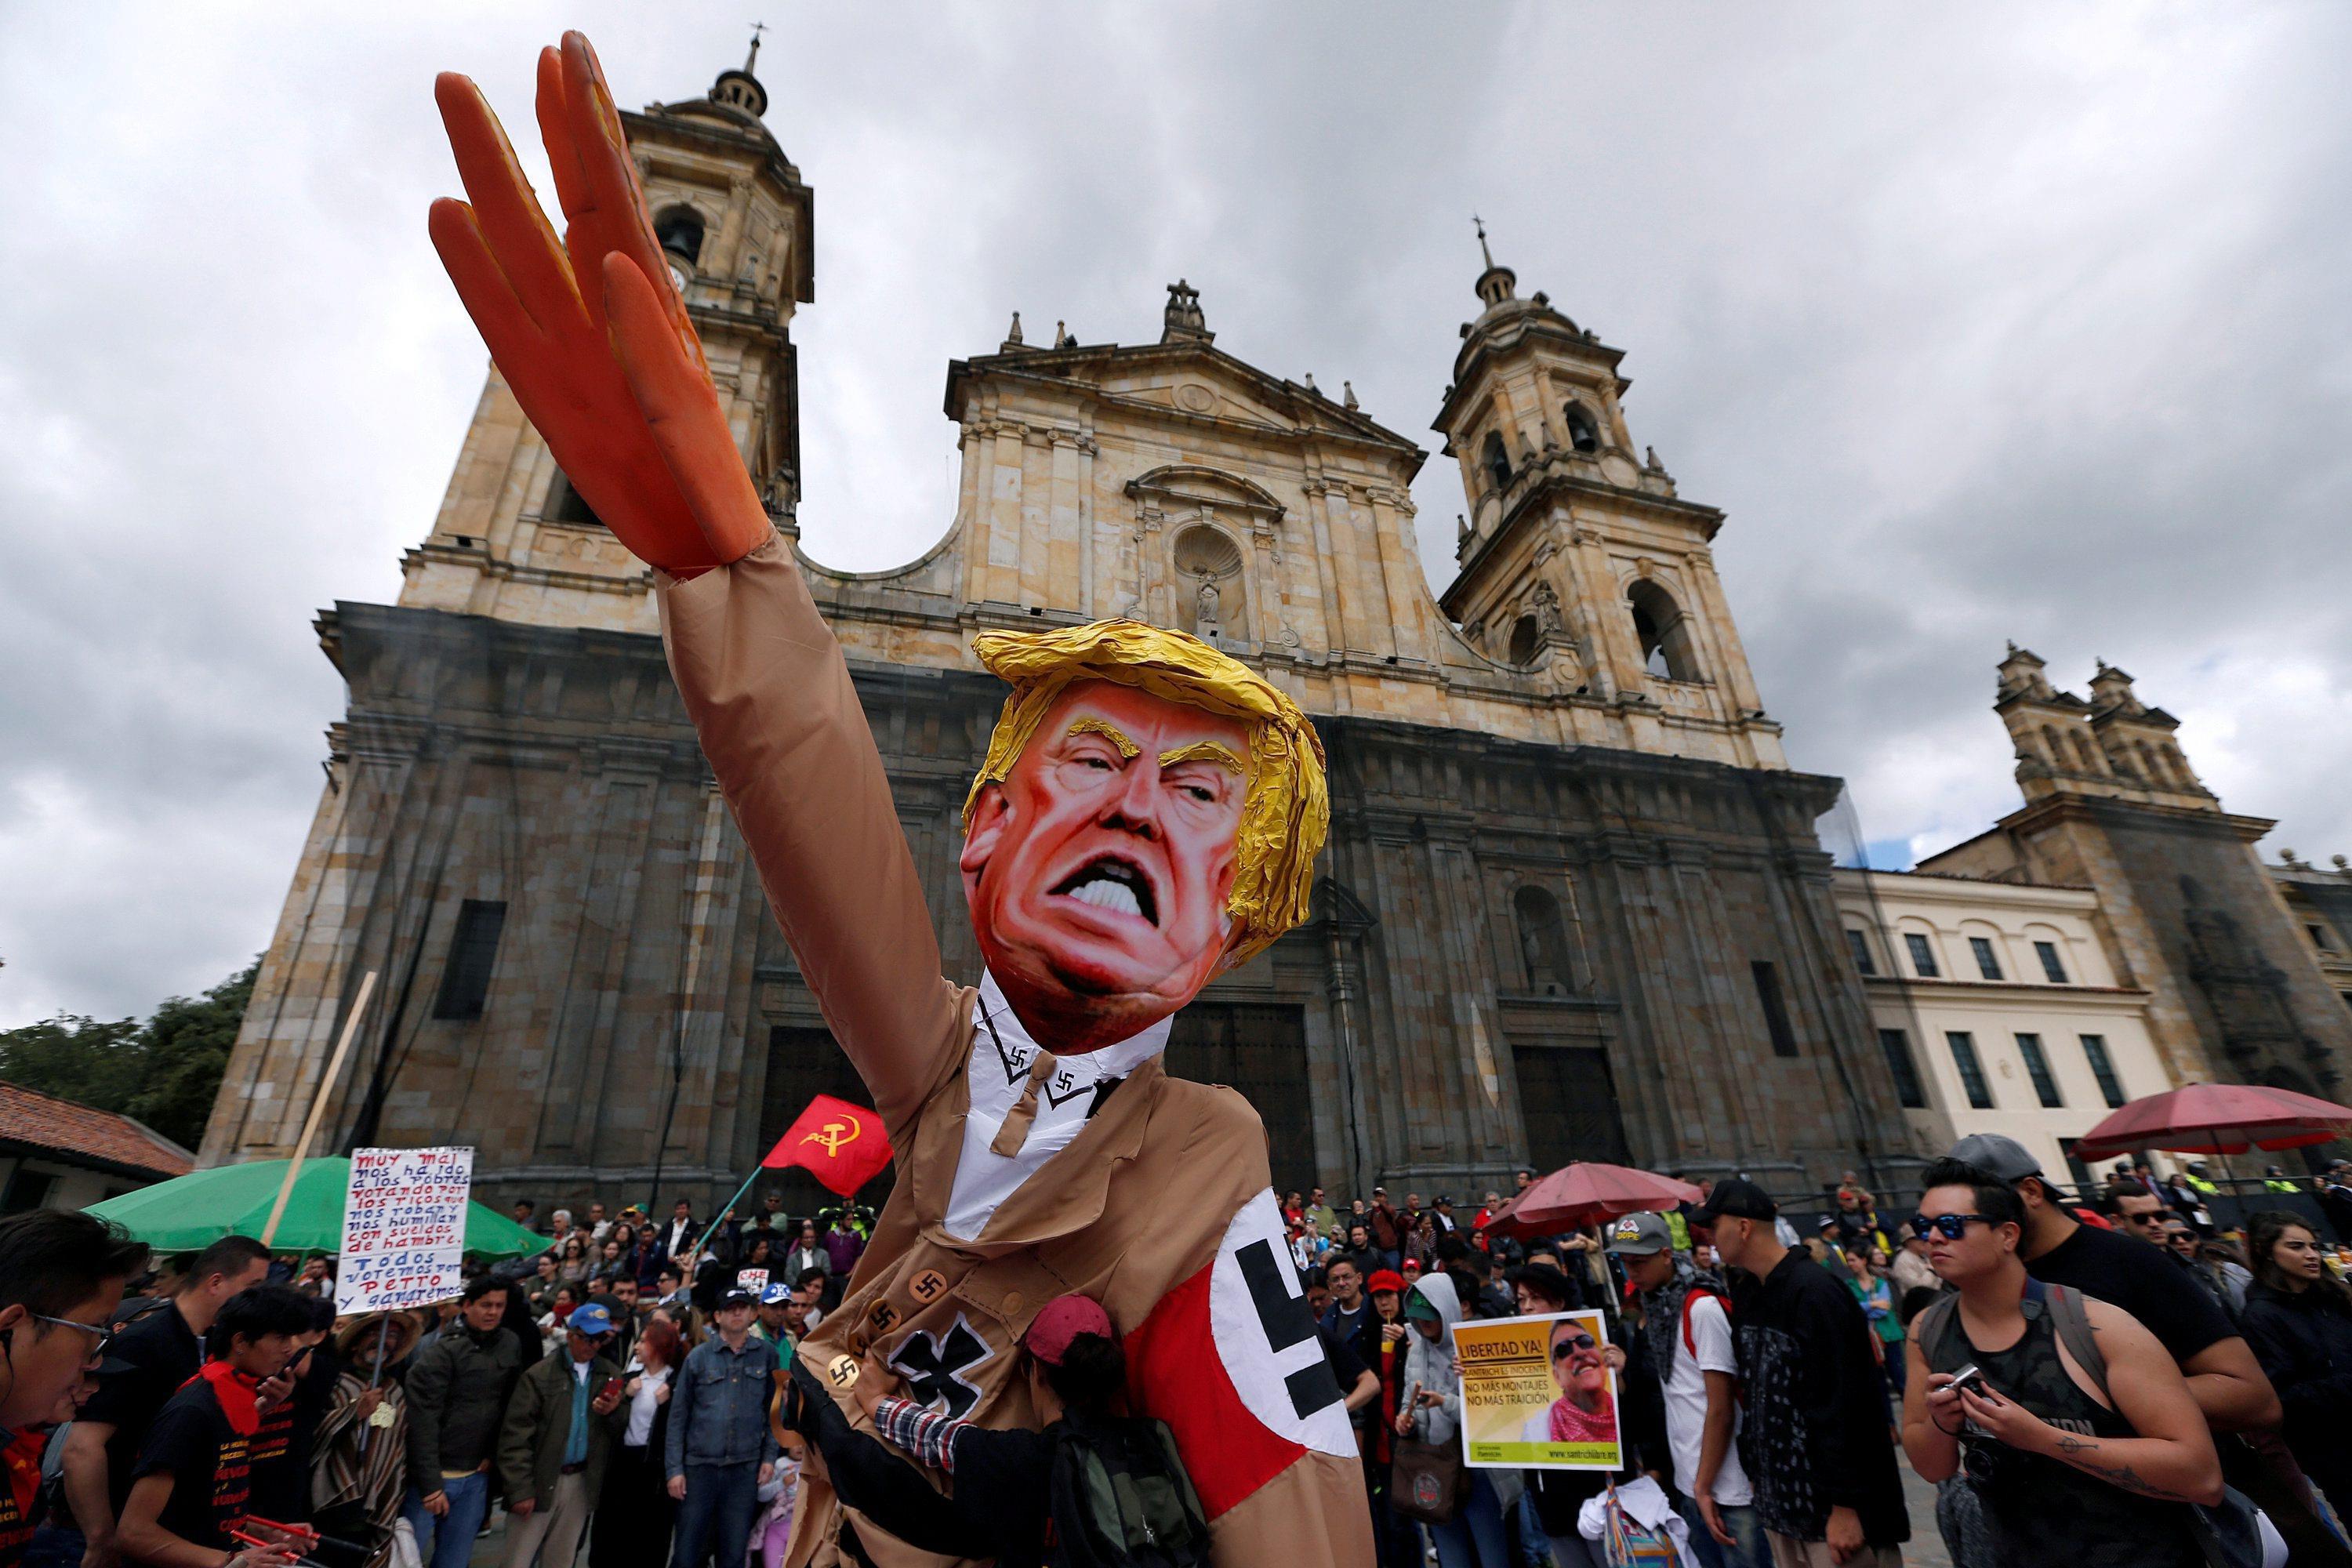 Protesters carry cutout depicting Trump in Nazi uniform during May Day rally in Bogota